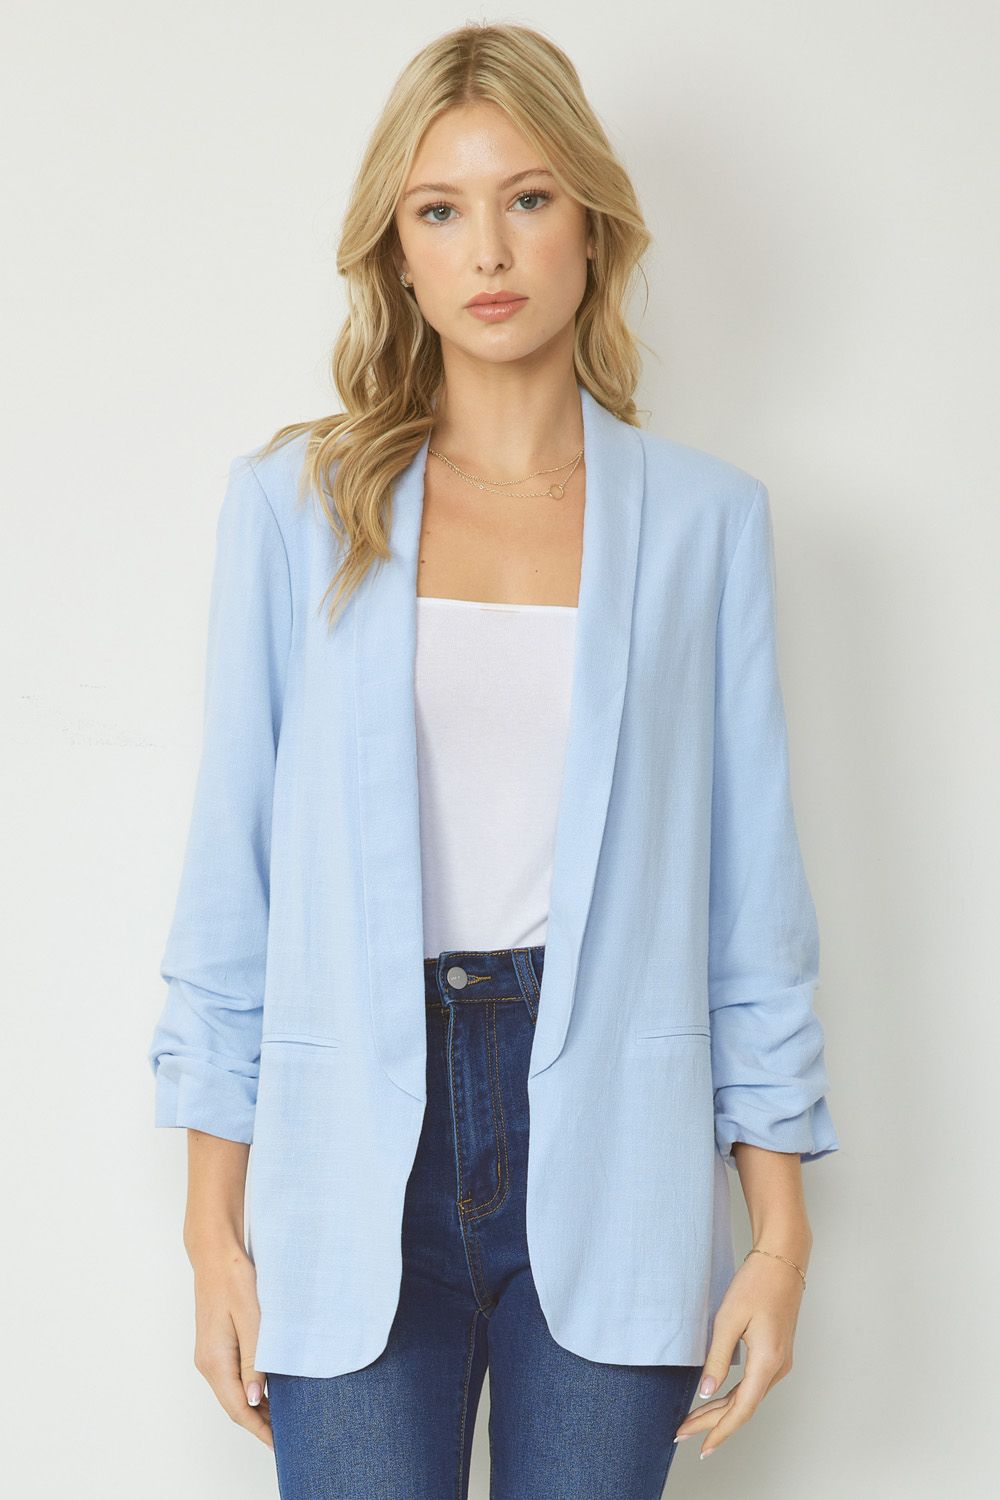 Solid blazer jacket featuring shirred detail at sleeve j13752